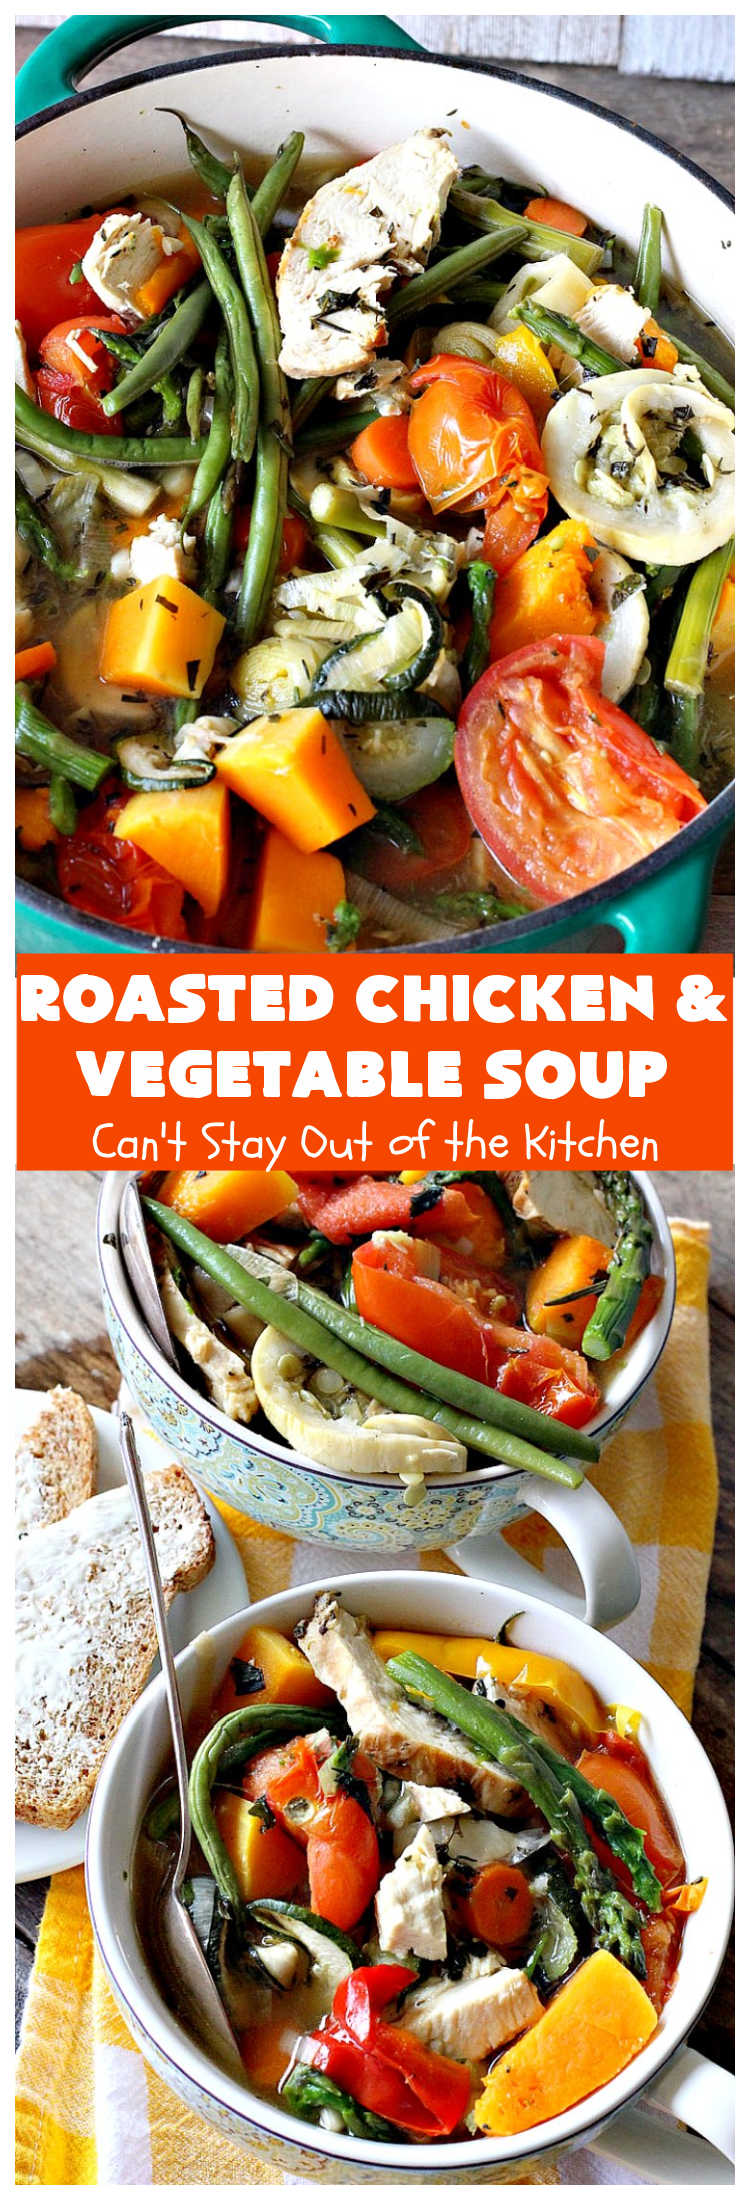 Roasted Chicken and Vegetable Soup | Can't Stay Out of the Kitchen | this superb #soup #recipe is made with grilled #chicken & lots of fresh #veggies seasoned with fresh #basil, #oregano, #thyme & #rosemary. It's #healthy, #LowCalorie, #GlutenFree & #CleanEating. #HealthySoupRecipe #GlutenFreeSouprRecipe #LowCalorieSoupRecipe #RoastedChickenAndVegetableSoup #tomatoes #broccoli #asparagus #carrots #zucchini #YellowSquash